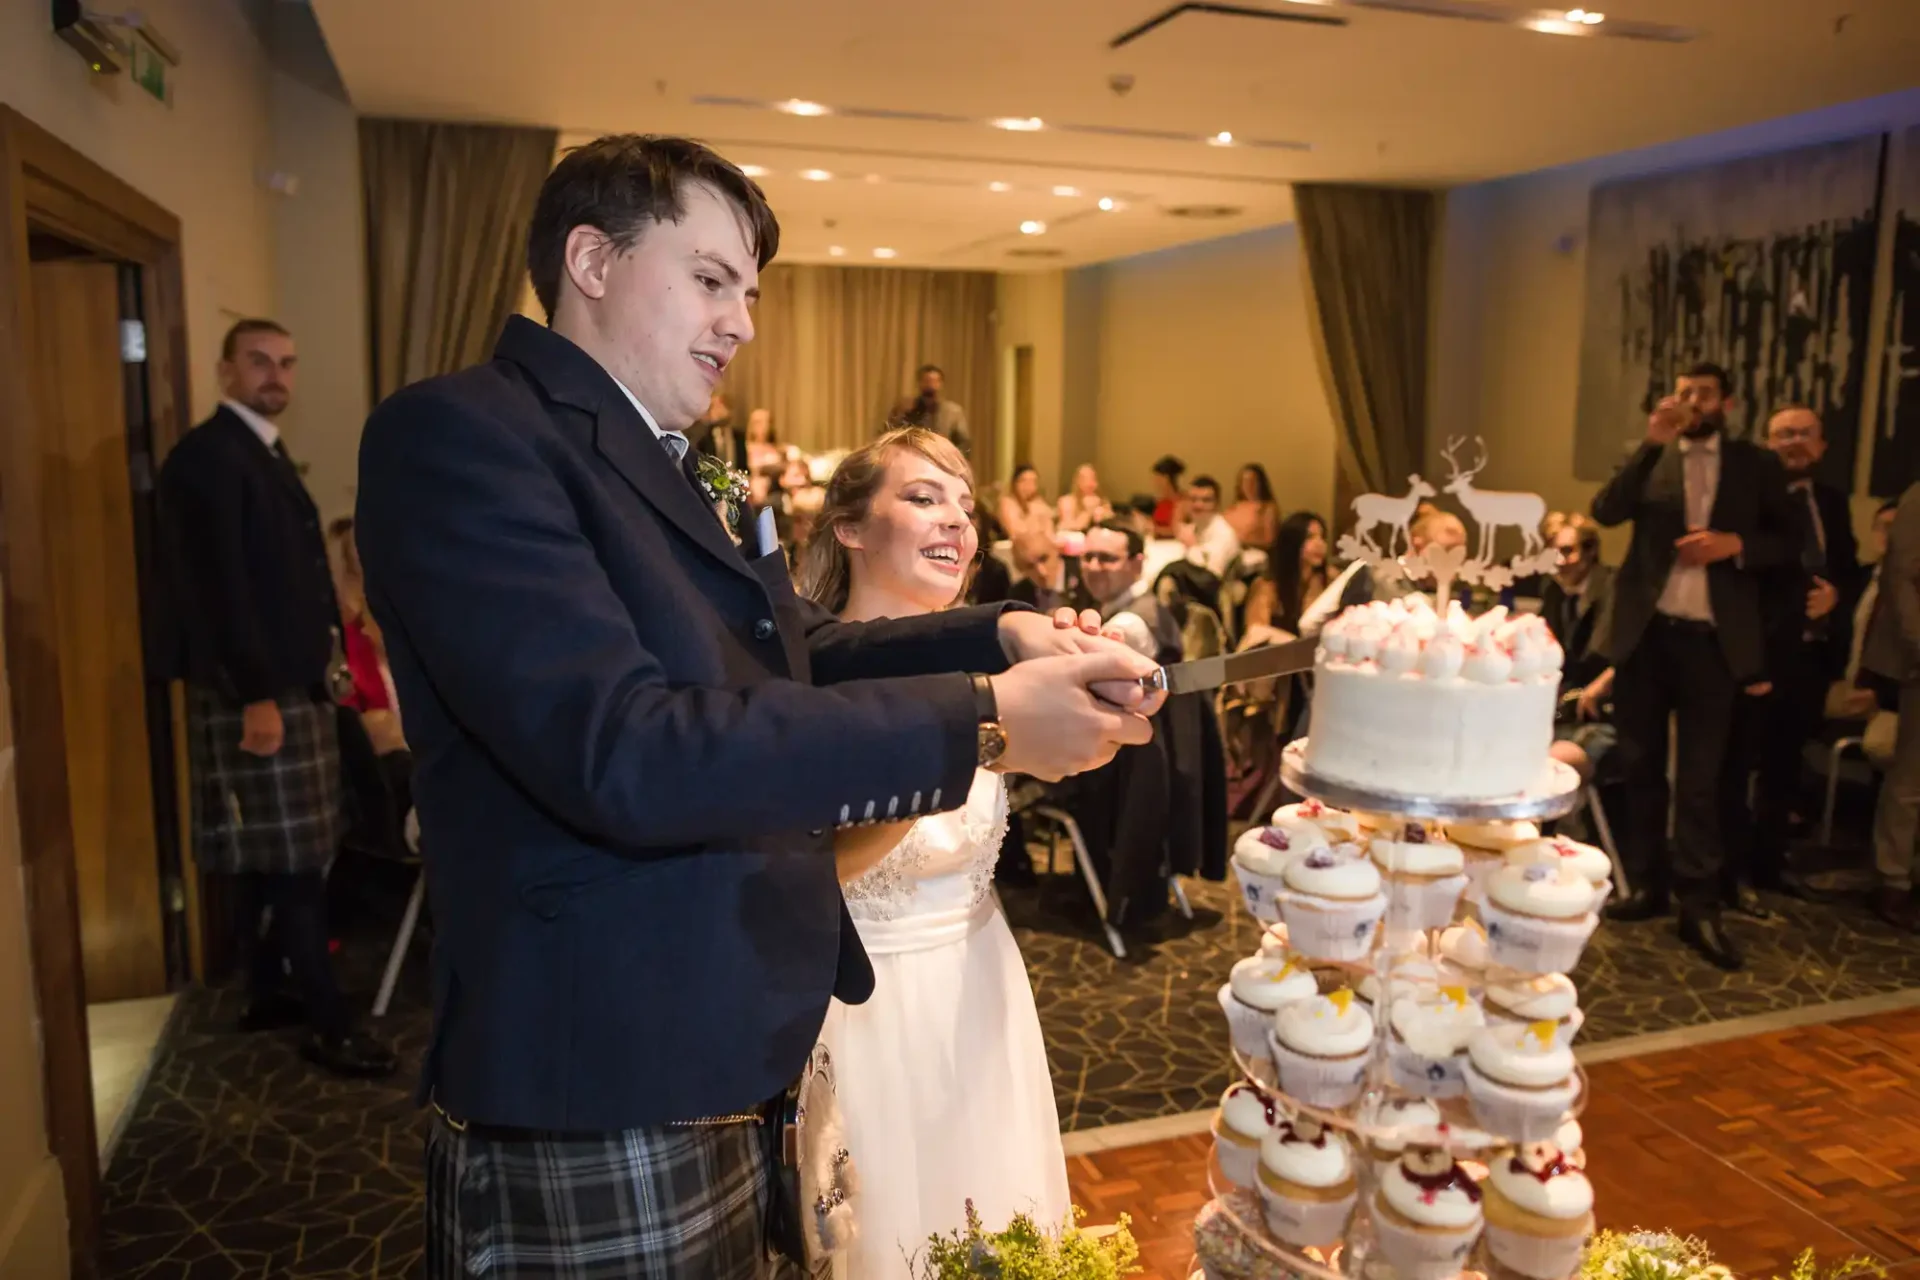 A bride and groom cutting a tiered wedding cake surrounded by guests in a warmly lit room.